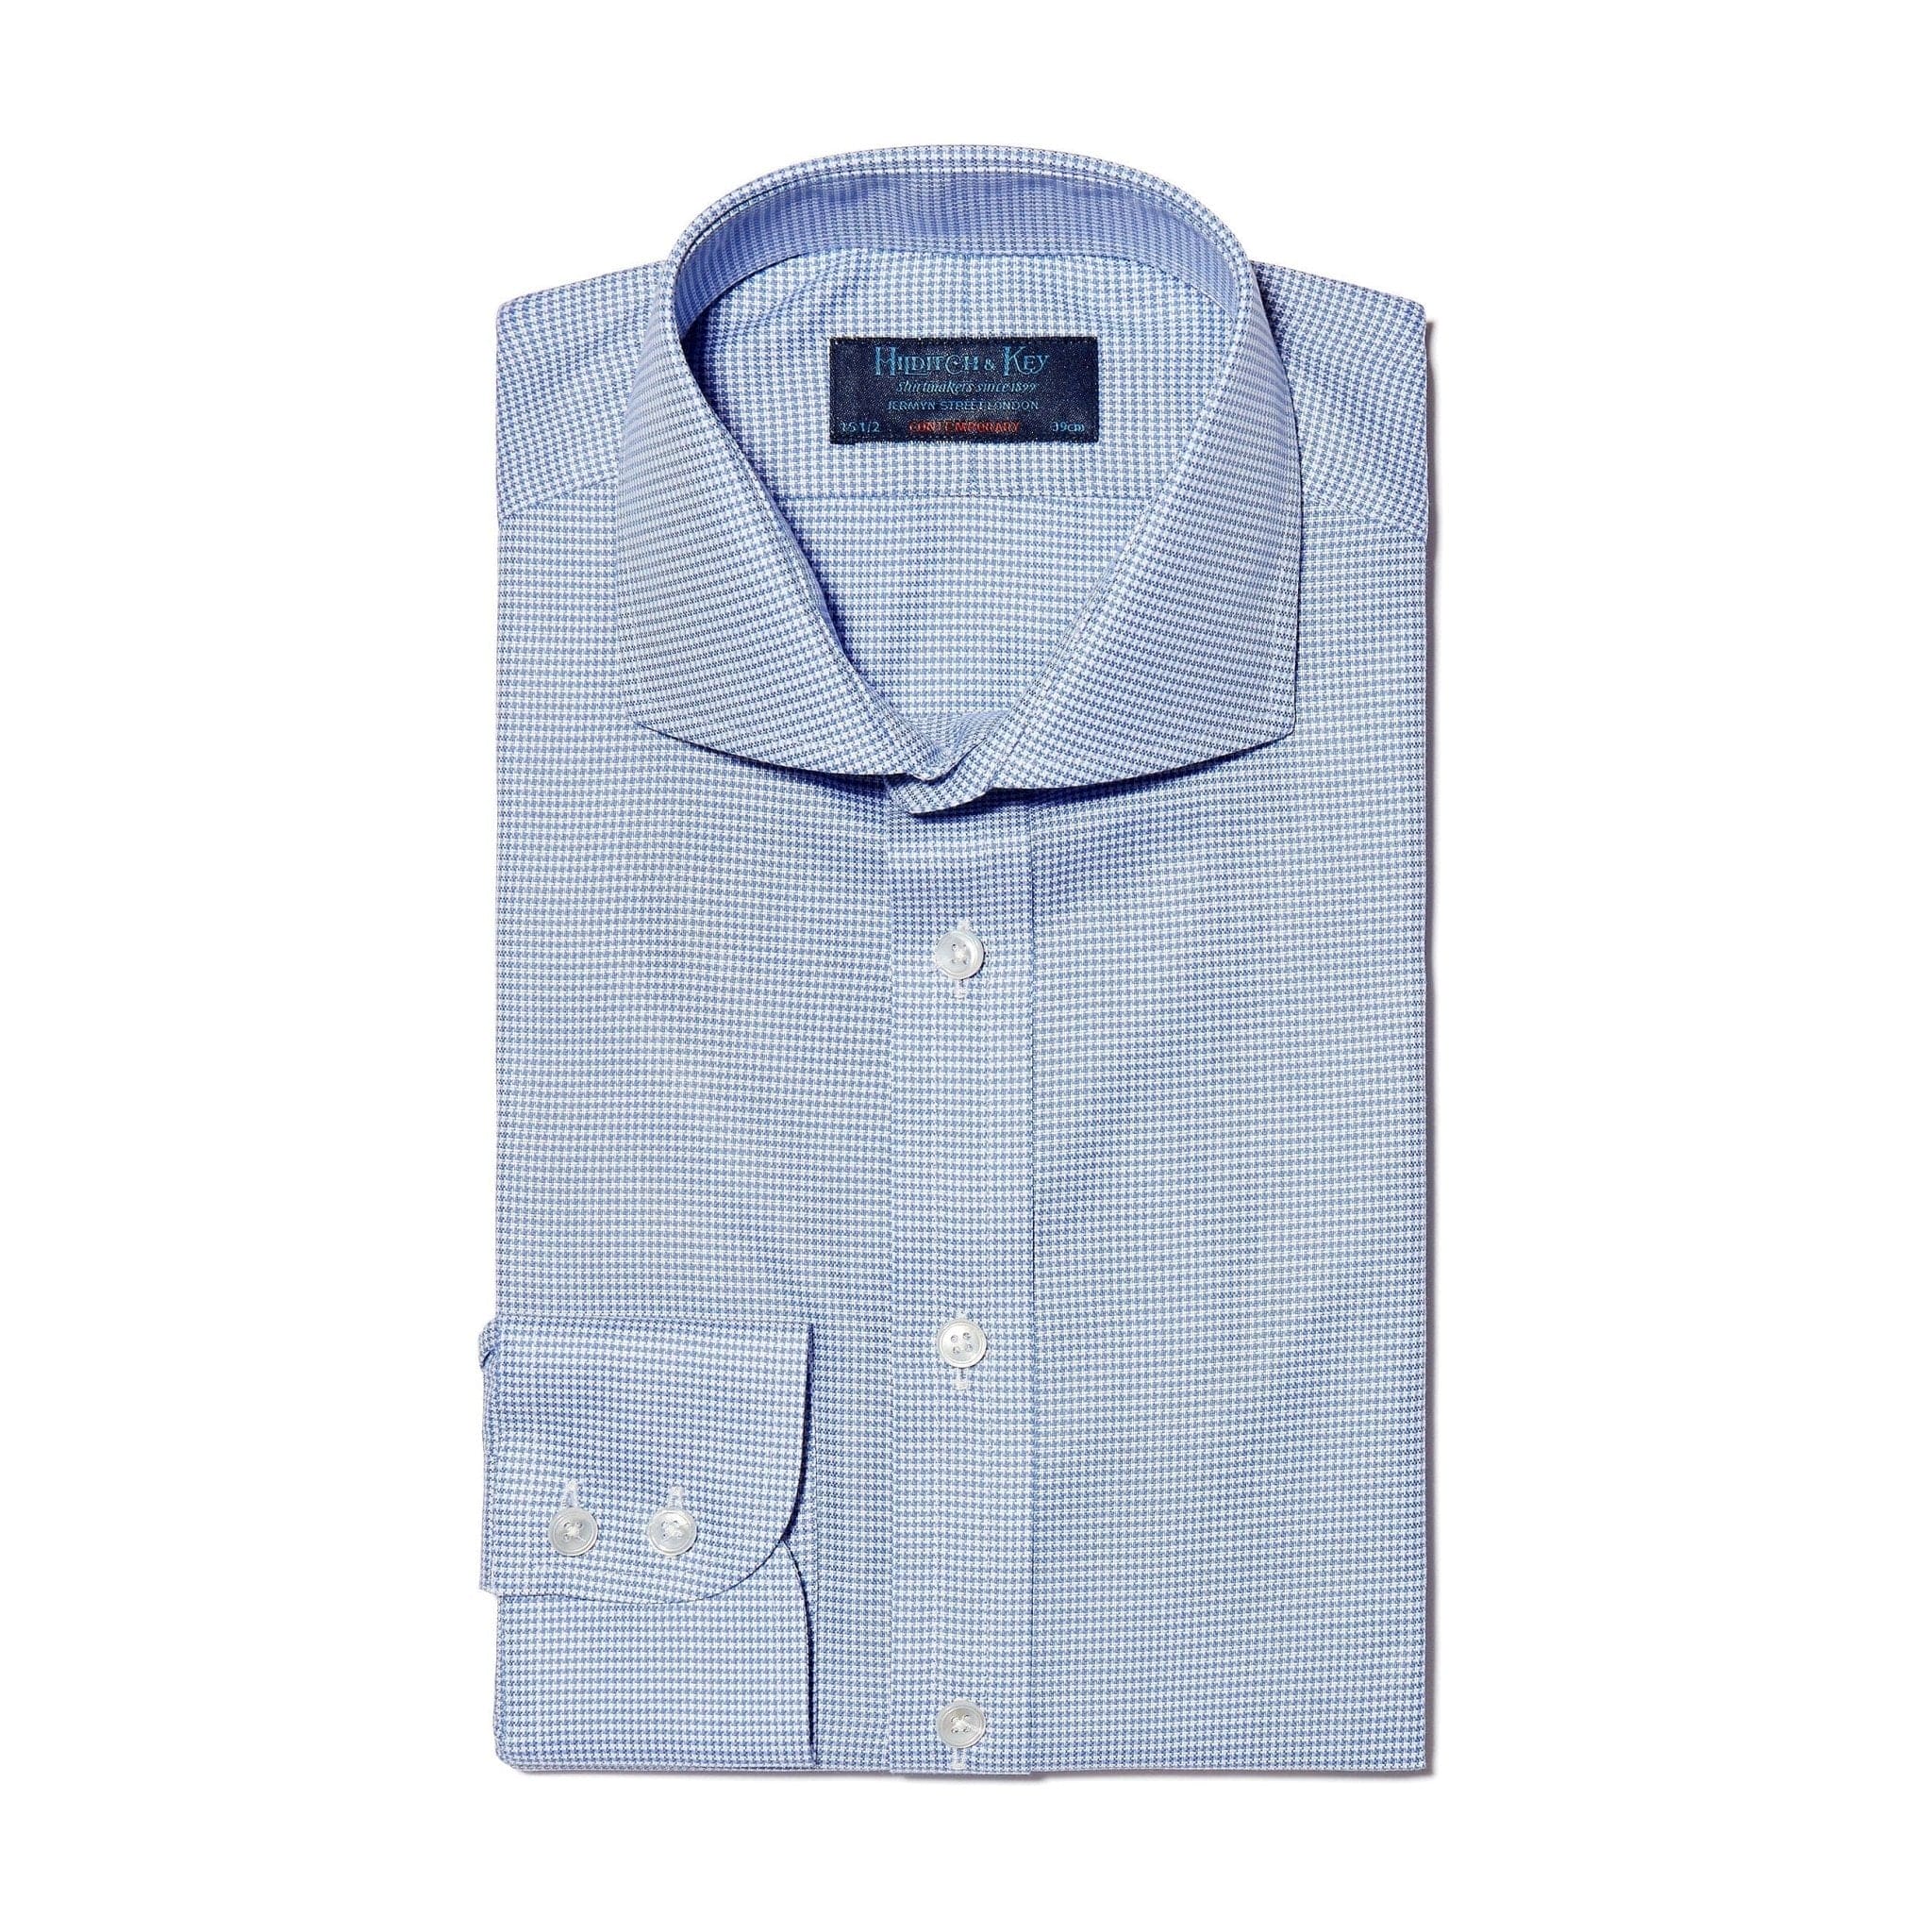 Contemporary Fit, Cut-away Collar, 2 Button Cuff Shirt In Blue Houndstooth Cotton